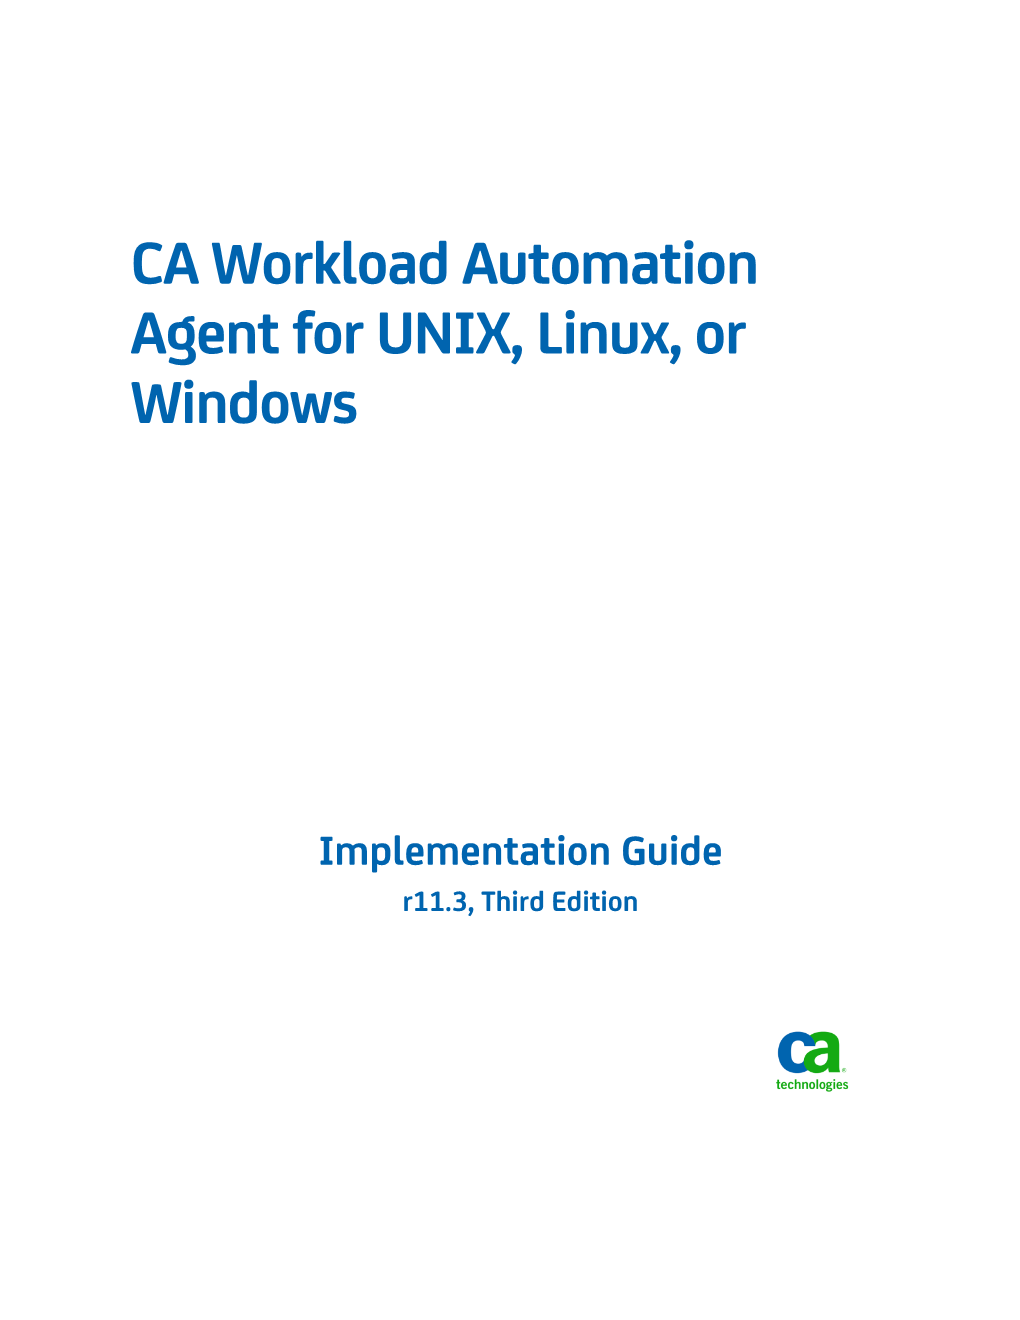 CA Workload Automation Agent for UNIX, Linux, Or Windows